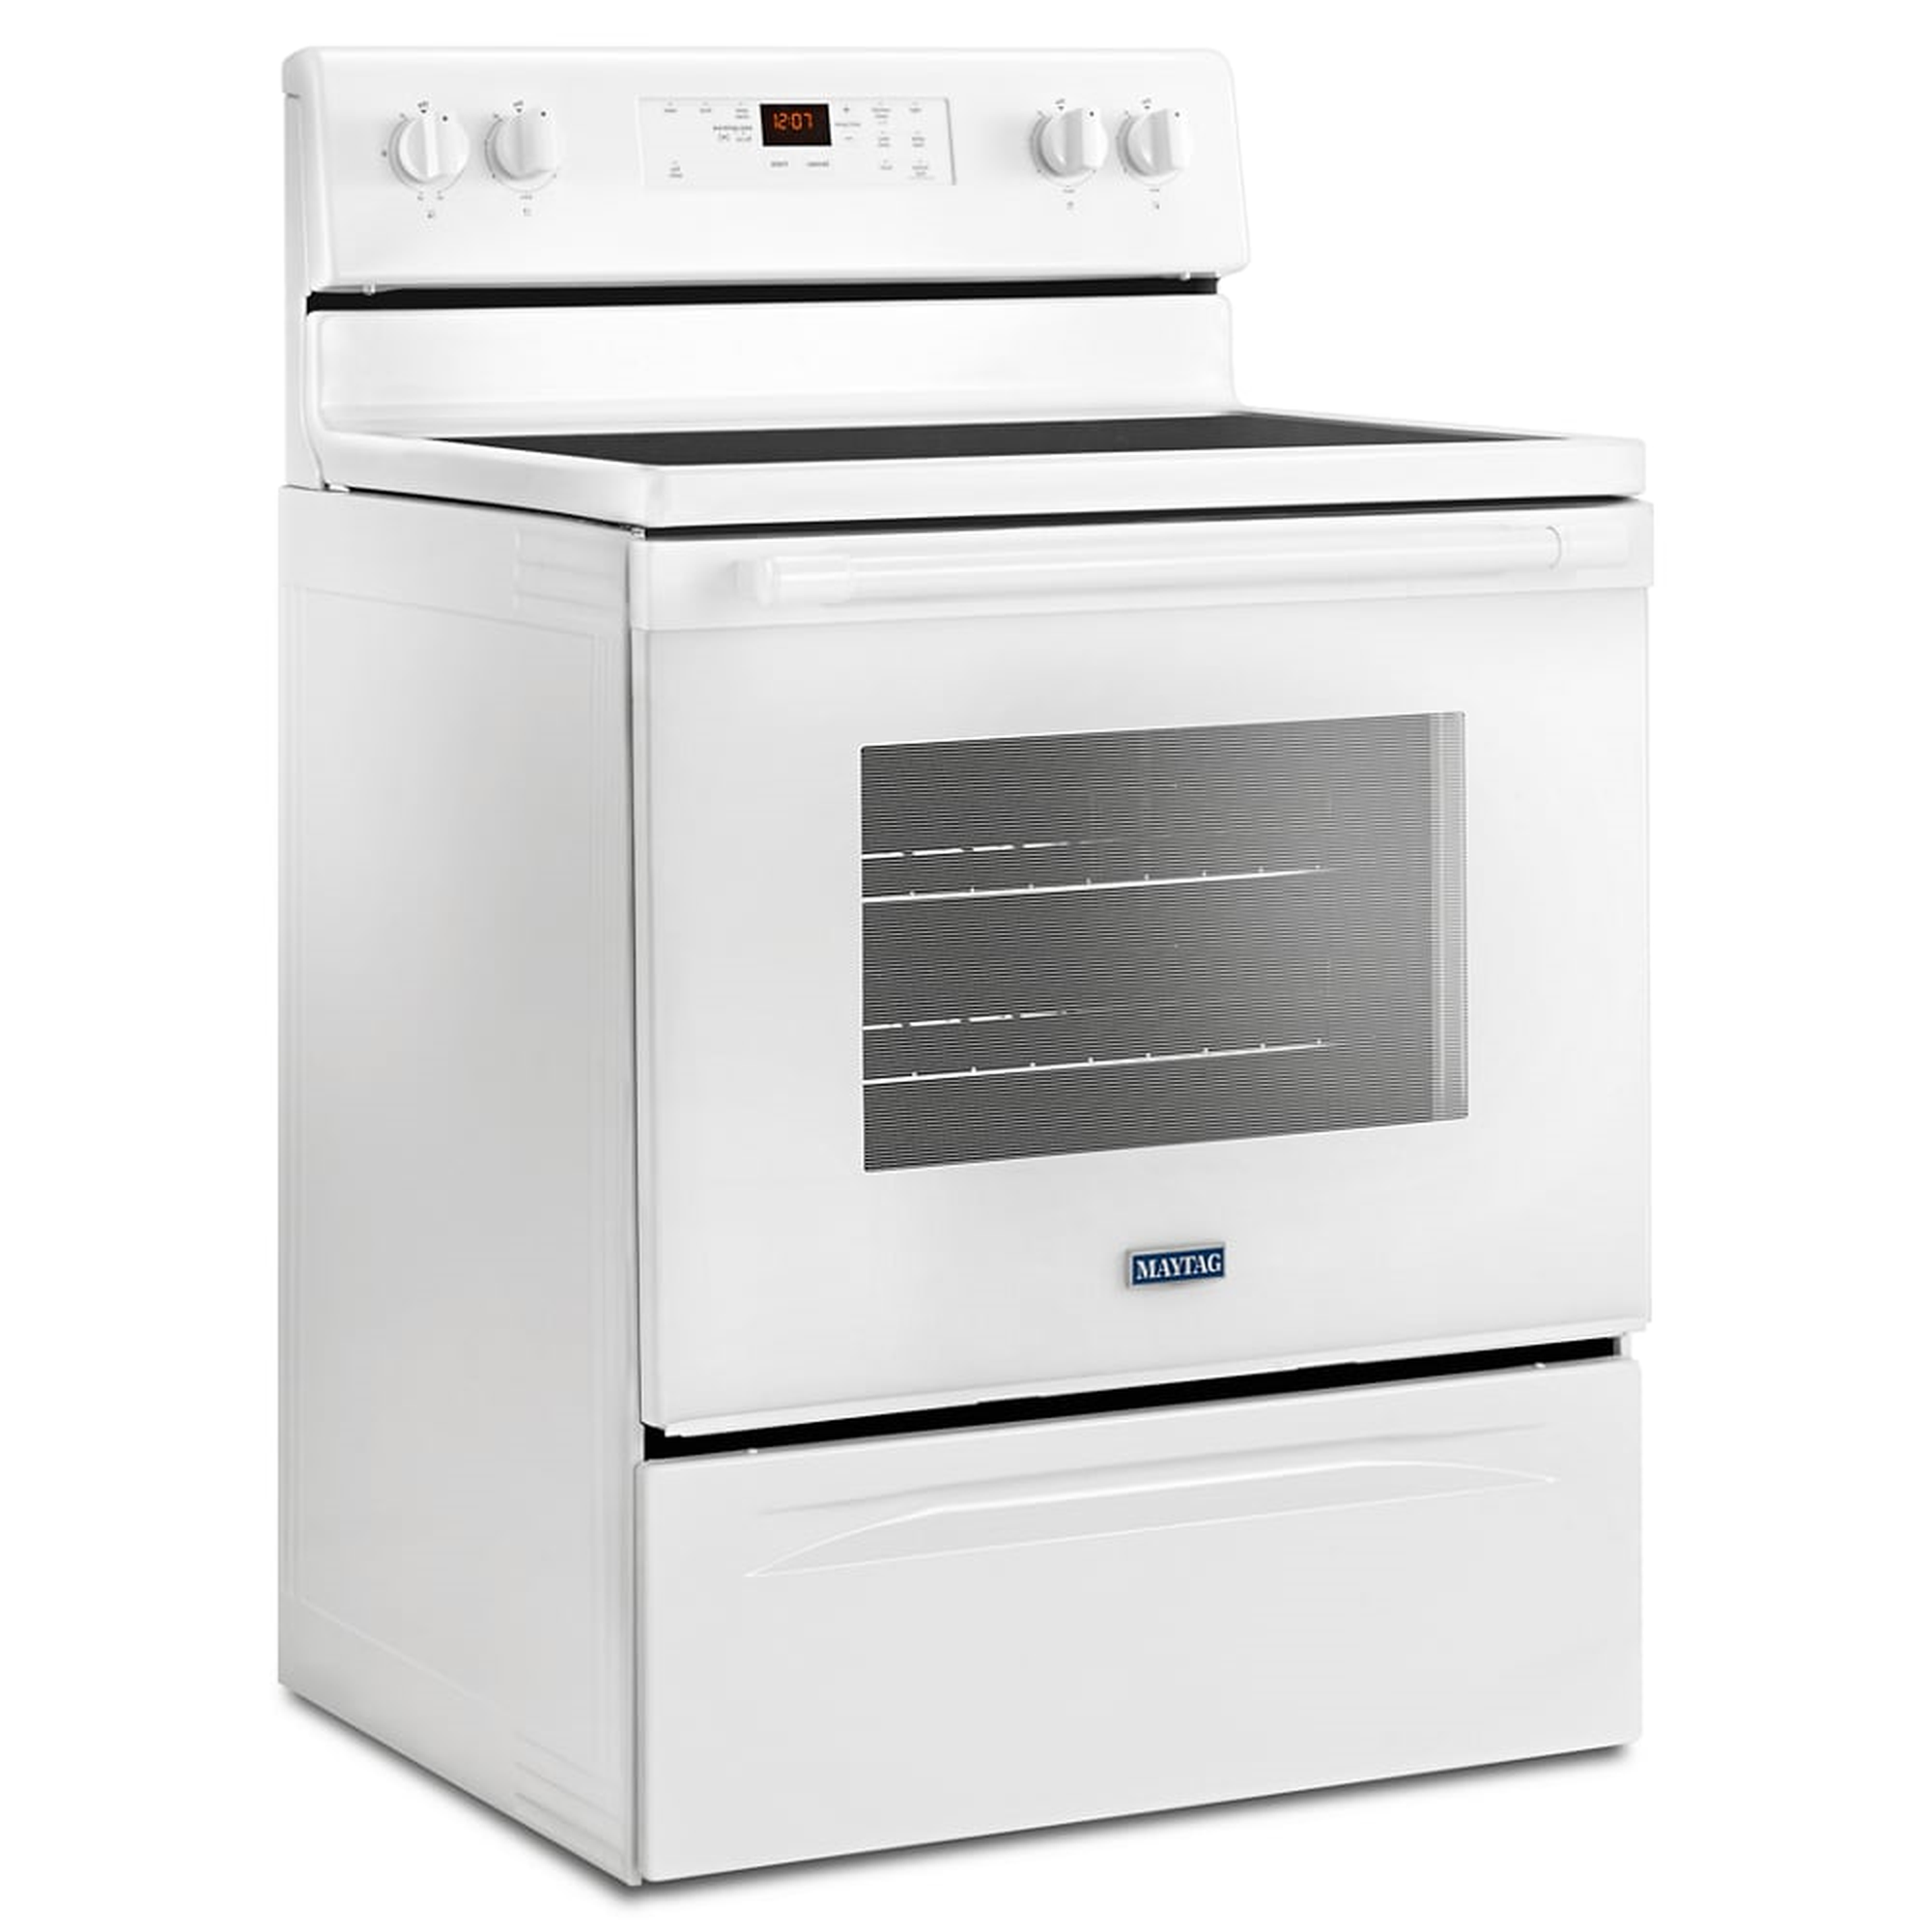 Maytag 30 in. 5.3 cu. ft. Air Fry Convection Oven Freestanding Electric  Range with 5 Smoothtop Burners - Fingerprint Resistant Stainless